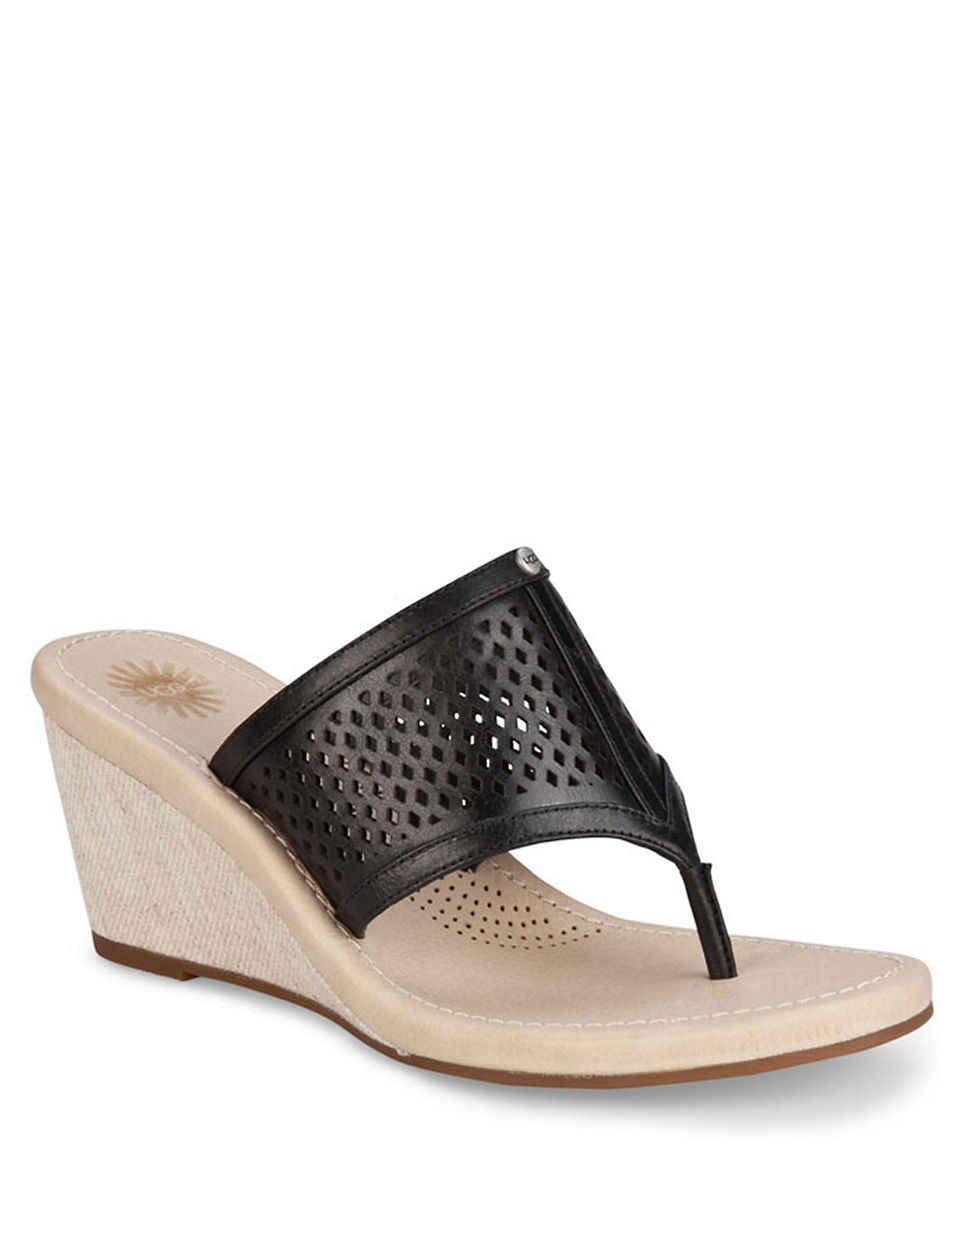 Ugg Solena Leather Thong Wedge Sandals in Black | Lyst